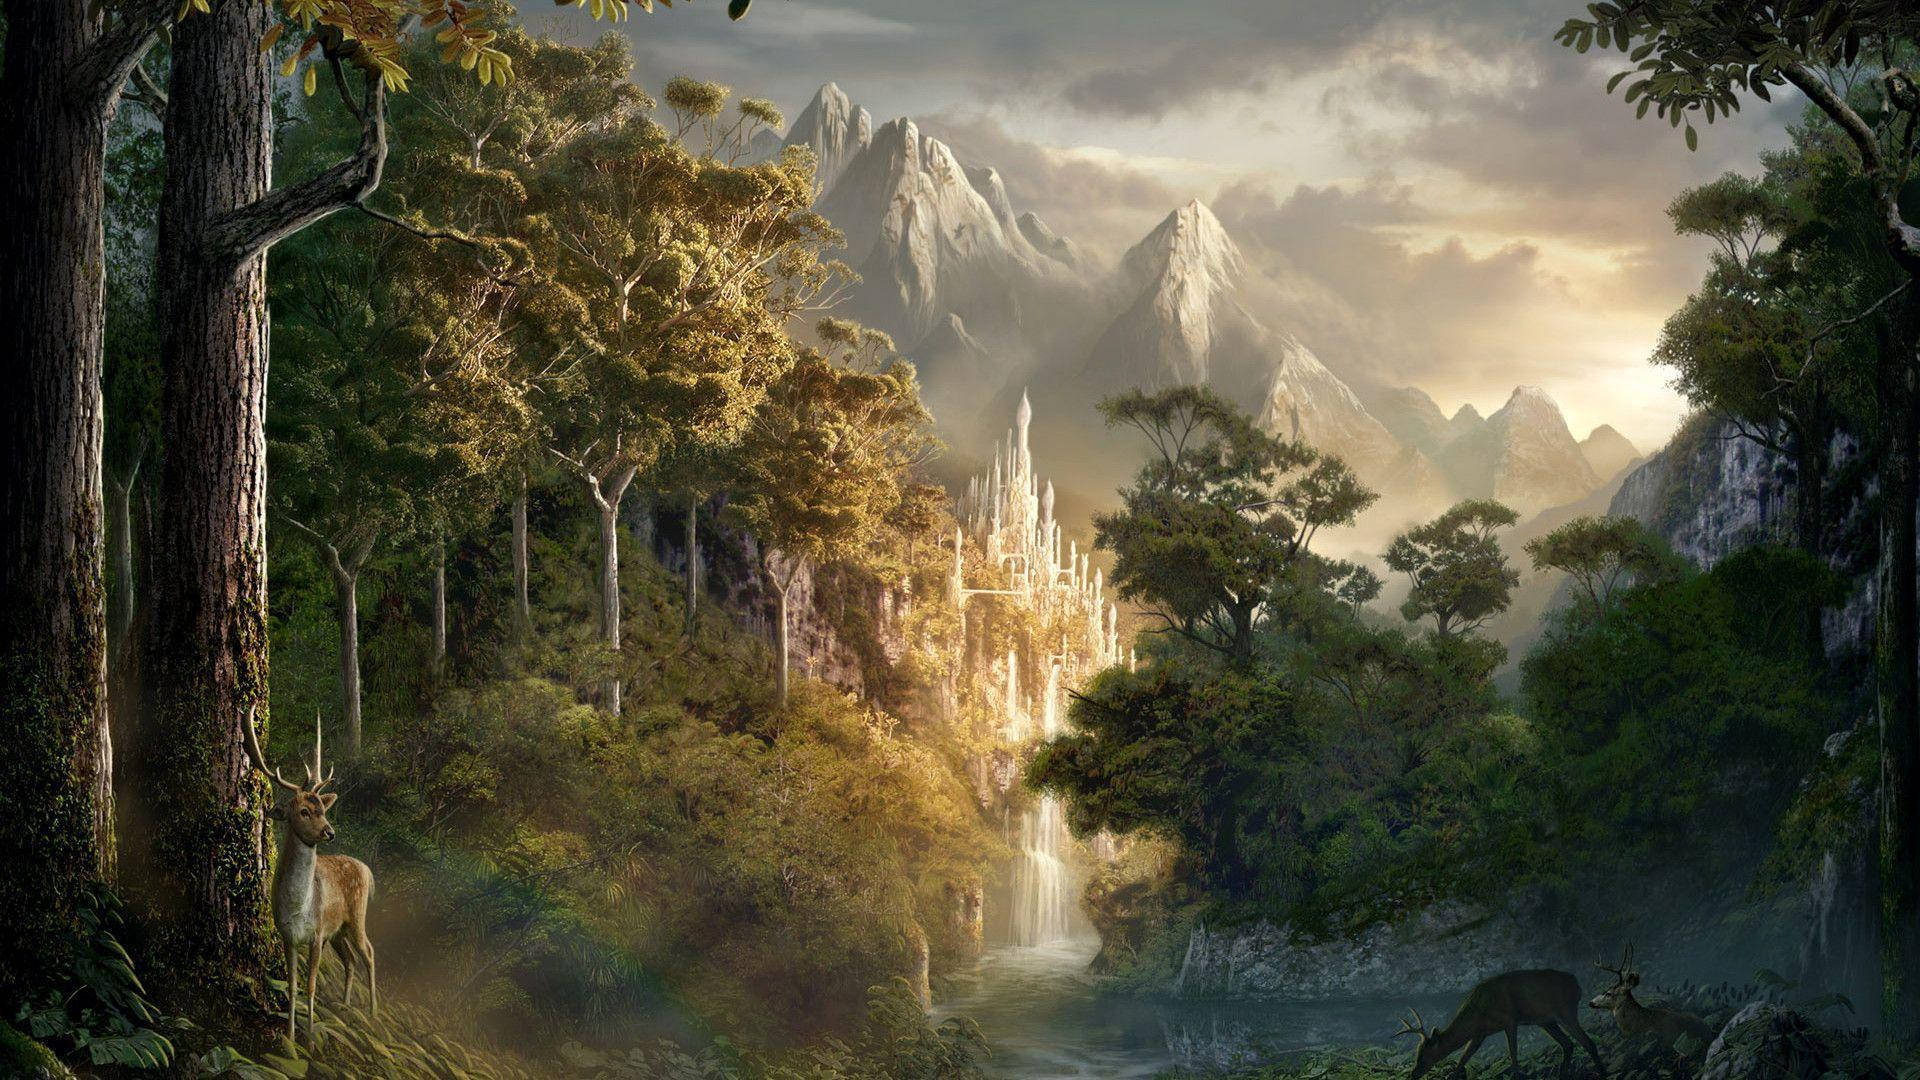 Fantasy City In Mountains